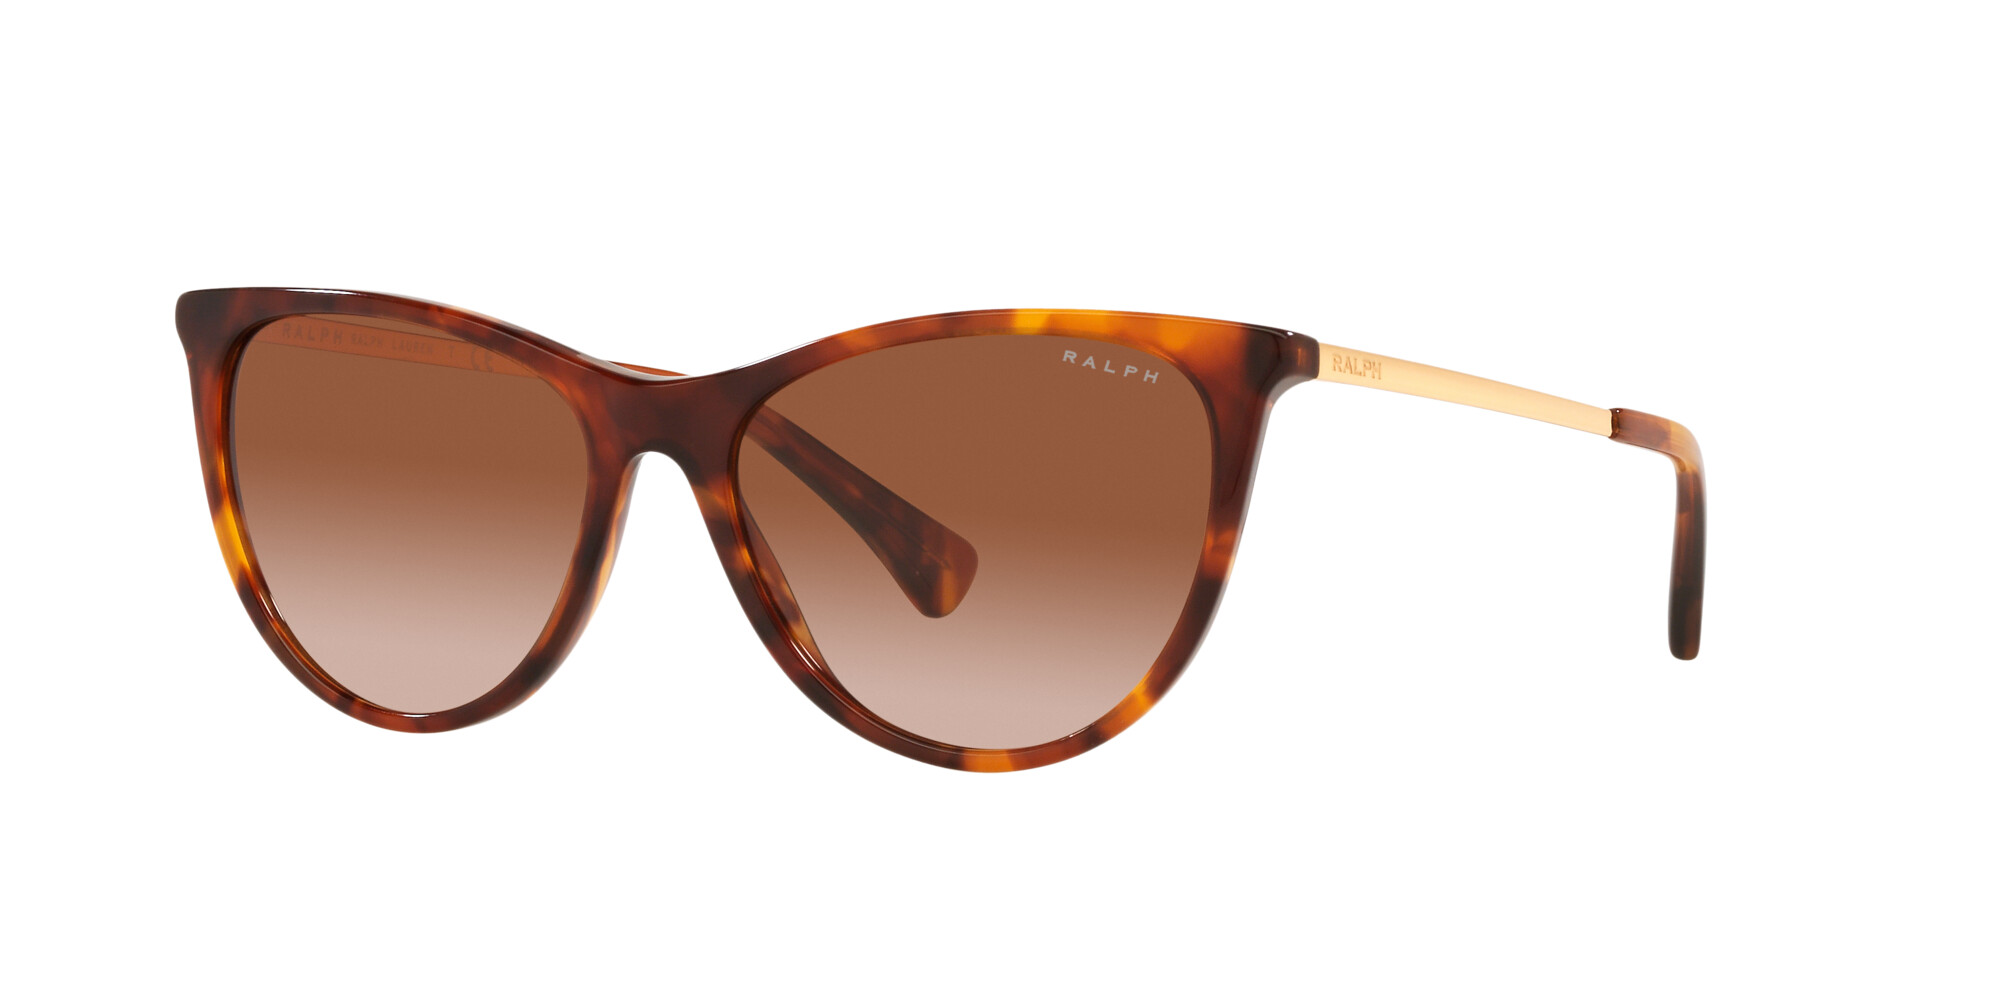 [products.image.angle_left01] Ralph Lauren 0RA5290 601113 Sonnenbrille